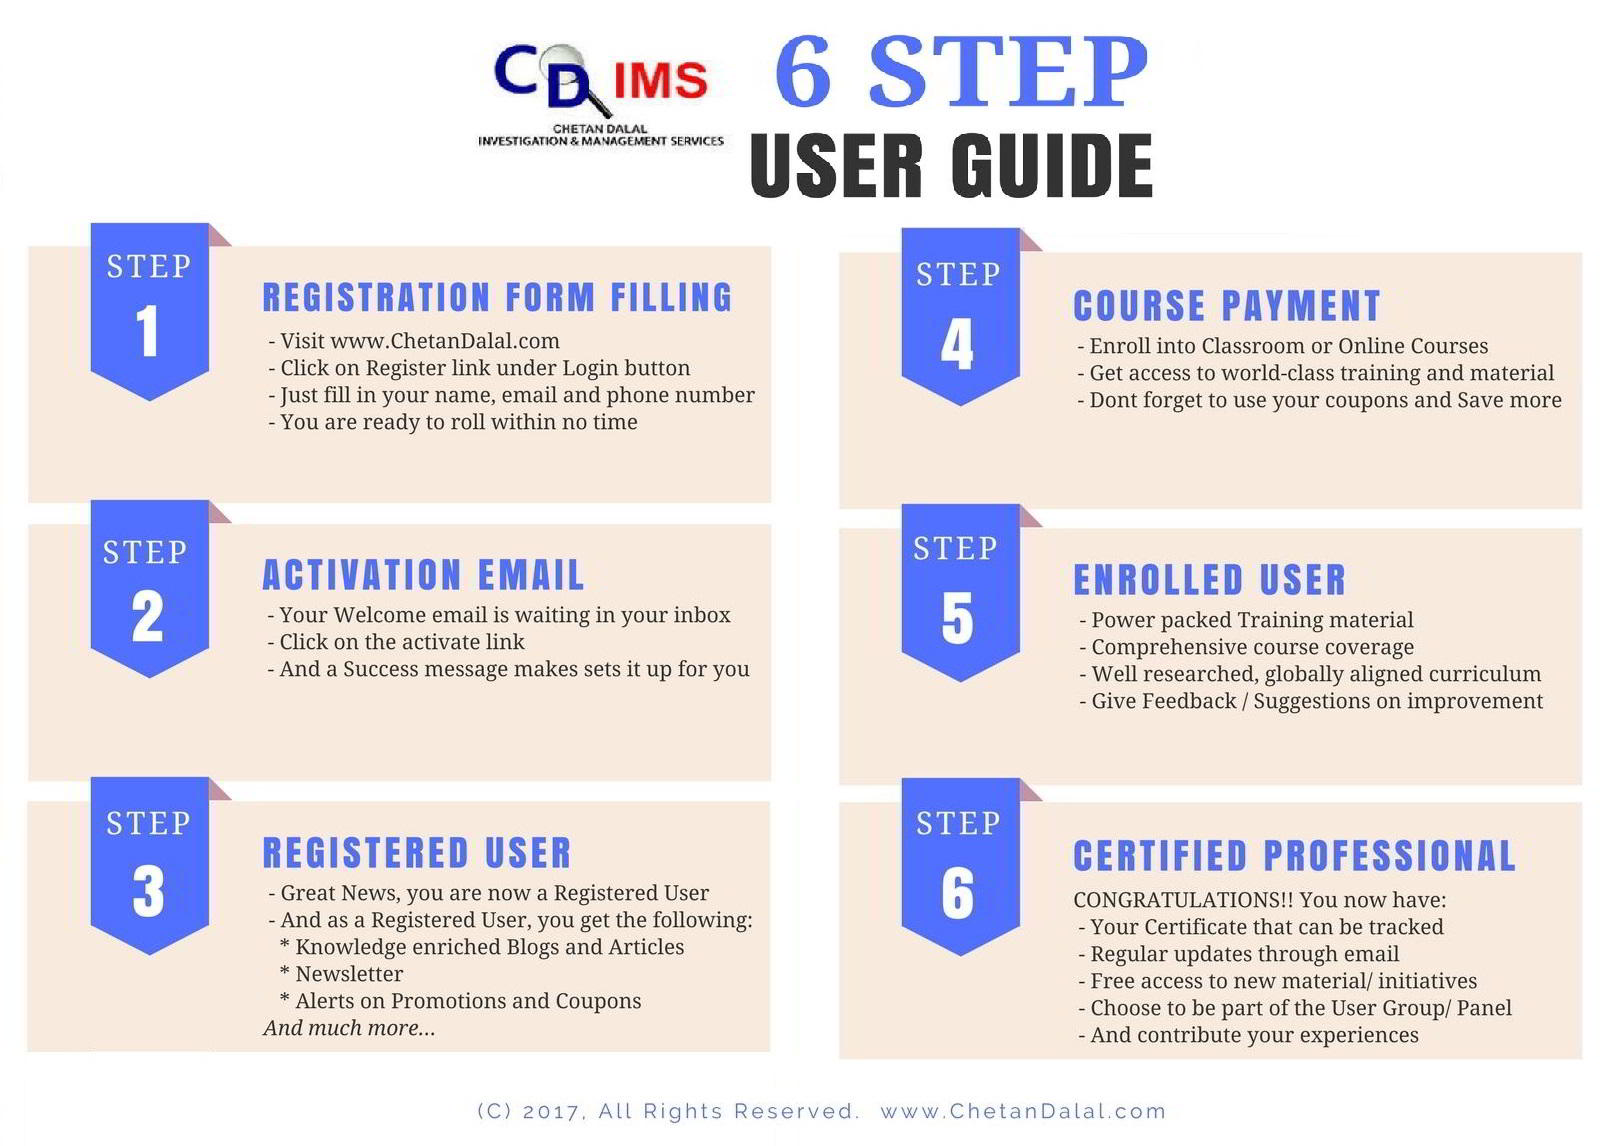 CDIMS User Guide